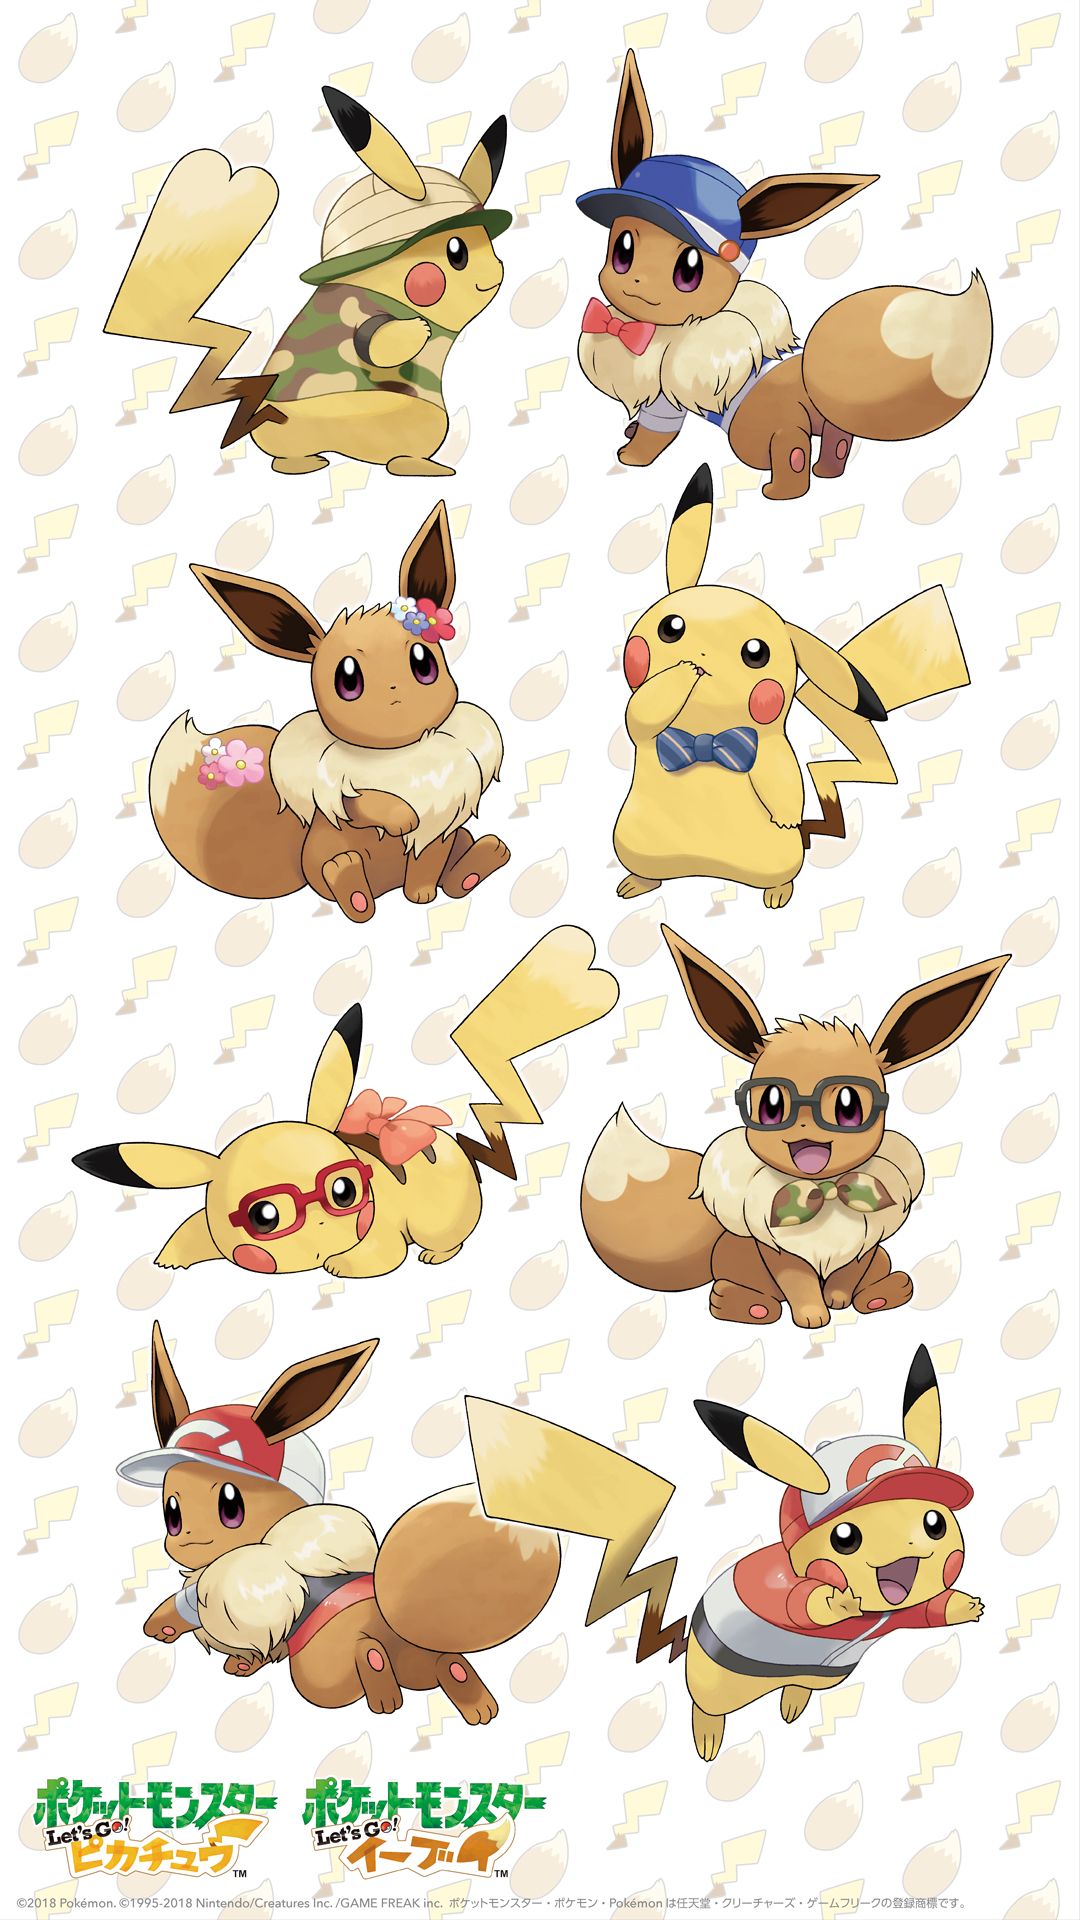 Download This Pokemon Let's GO Pikachu Eevee Wallpaper For Your PC And Smartphone